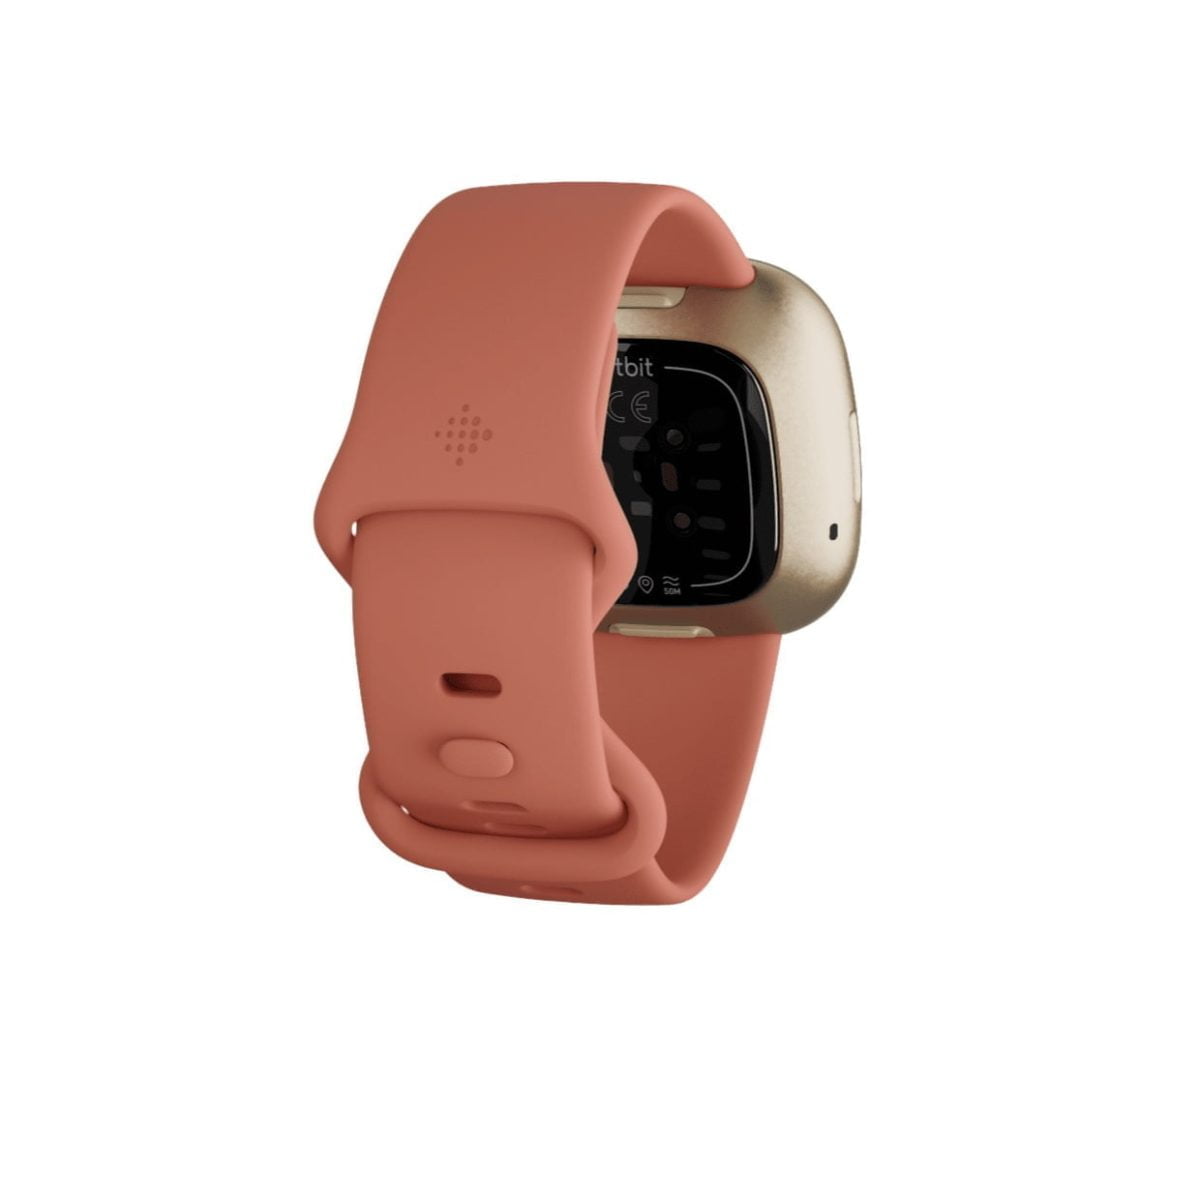 6 Fitbit &Lt;H1&Gt;Fitbit Versa 3, Health &Amp; Fitness Smartwatch With Gps, Pink Clay / Soft Gold Aluminum&Lt;/H1&Gt; Https://Youtu.be/Ihx_Bl3Yqlc &Lt;Div Class=&Quot;Product-Specs-Desc__Text&Quot;&Gt; Meet Fitbit Versa 3, The Motivational Health &Amp; Fitness Smartwatch With Built-In Gps, Active Zone Minutes And Music Experiences To Keep You Moving. &Lt;/Div&Gt; Fitbit Versa 3 Fitbit Versa 3 Fitness Smartwatch With Gps - Pink Clay / Soft Gold Aluminum